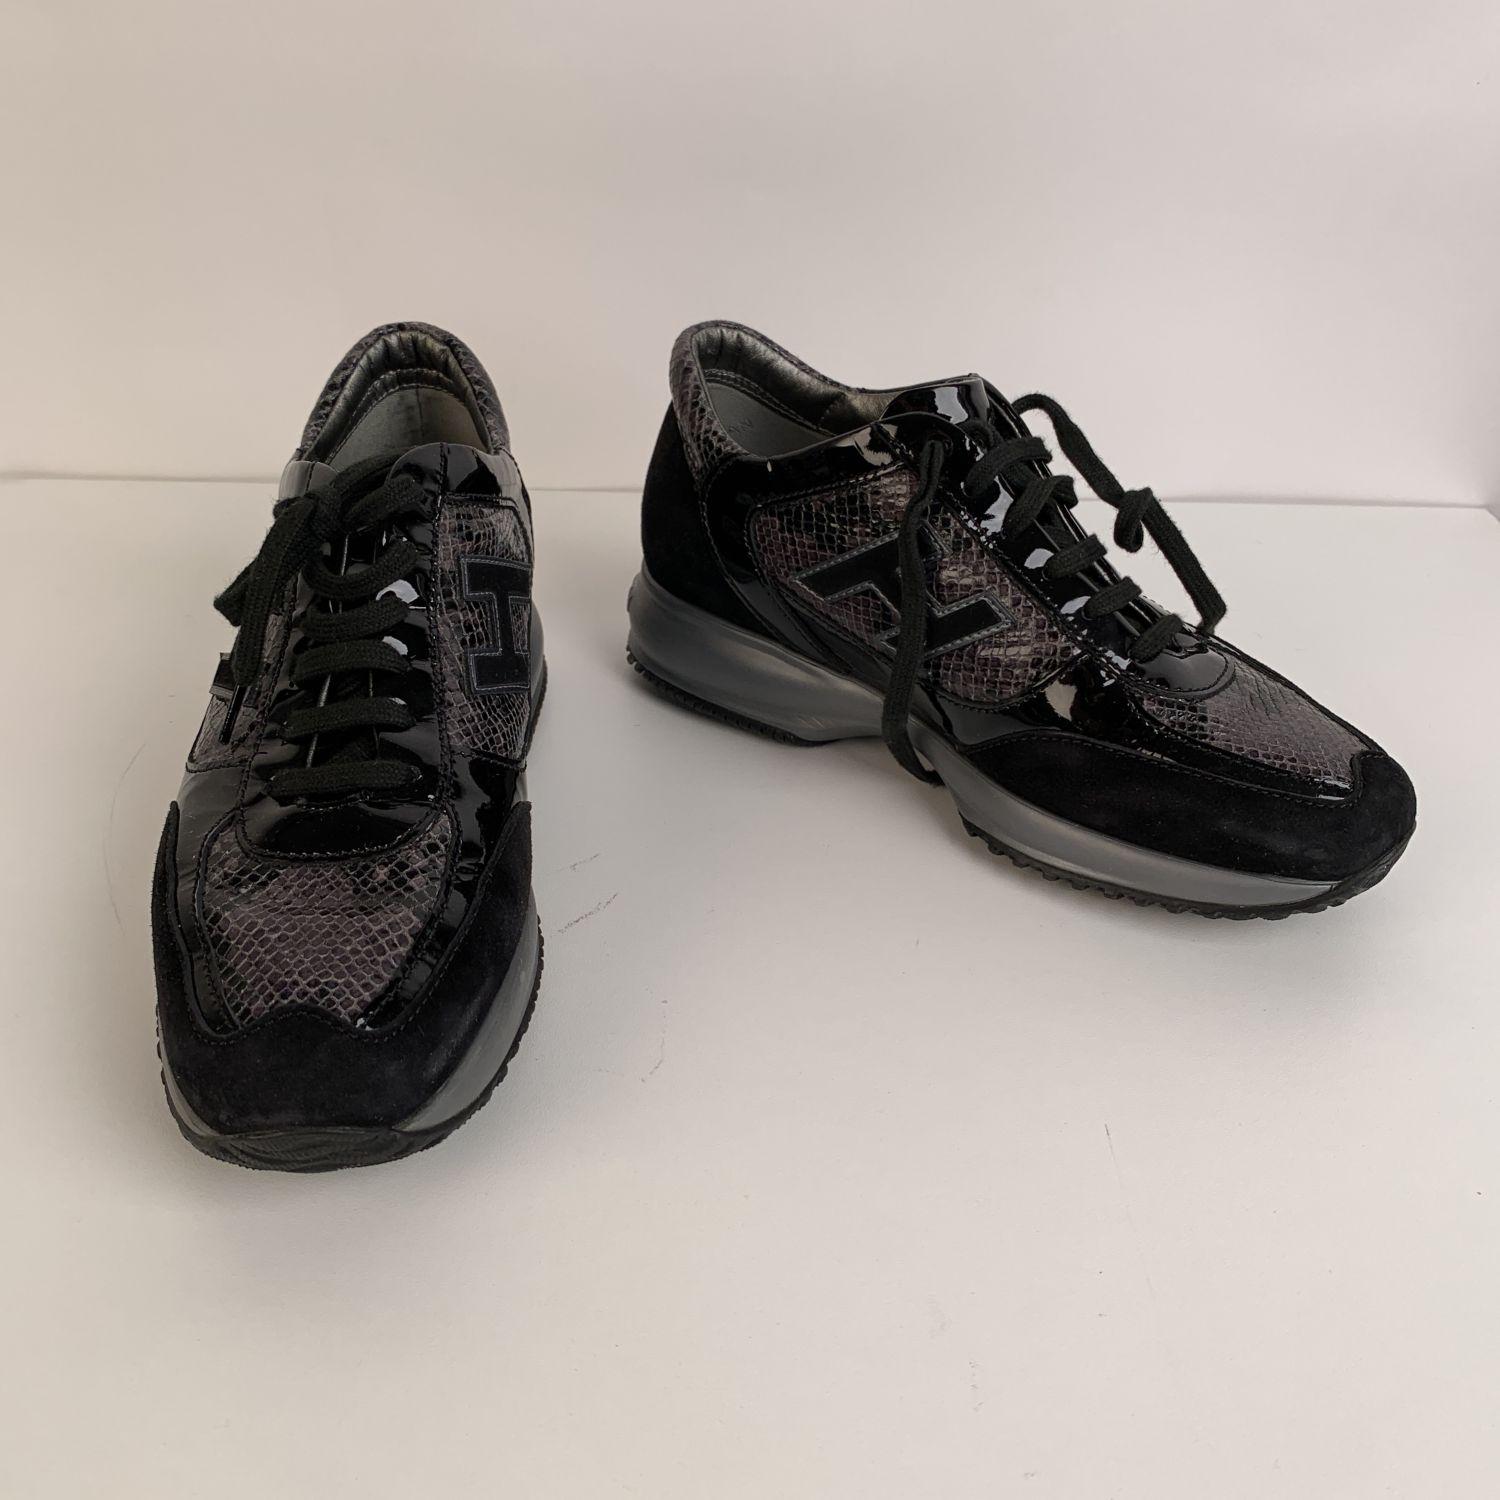 Glamourous Hogan 'Interactive' sneakers shoes crafted in black suede and patent leather. Hogan logo on snake-look panel. Removable internal footbed. Made in Italy. Size: 37. Hogan box and dustbag included. Extra-laces included.



Details

MATERIAL: